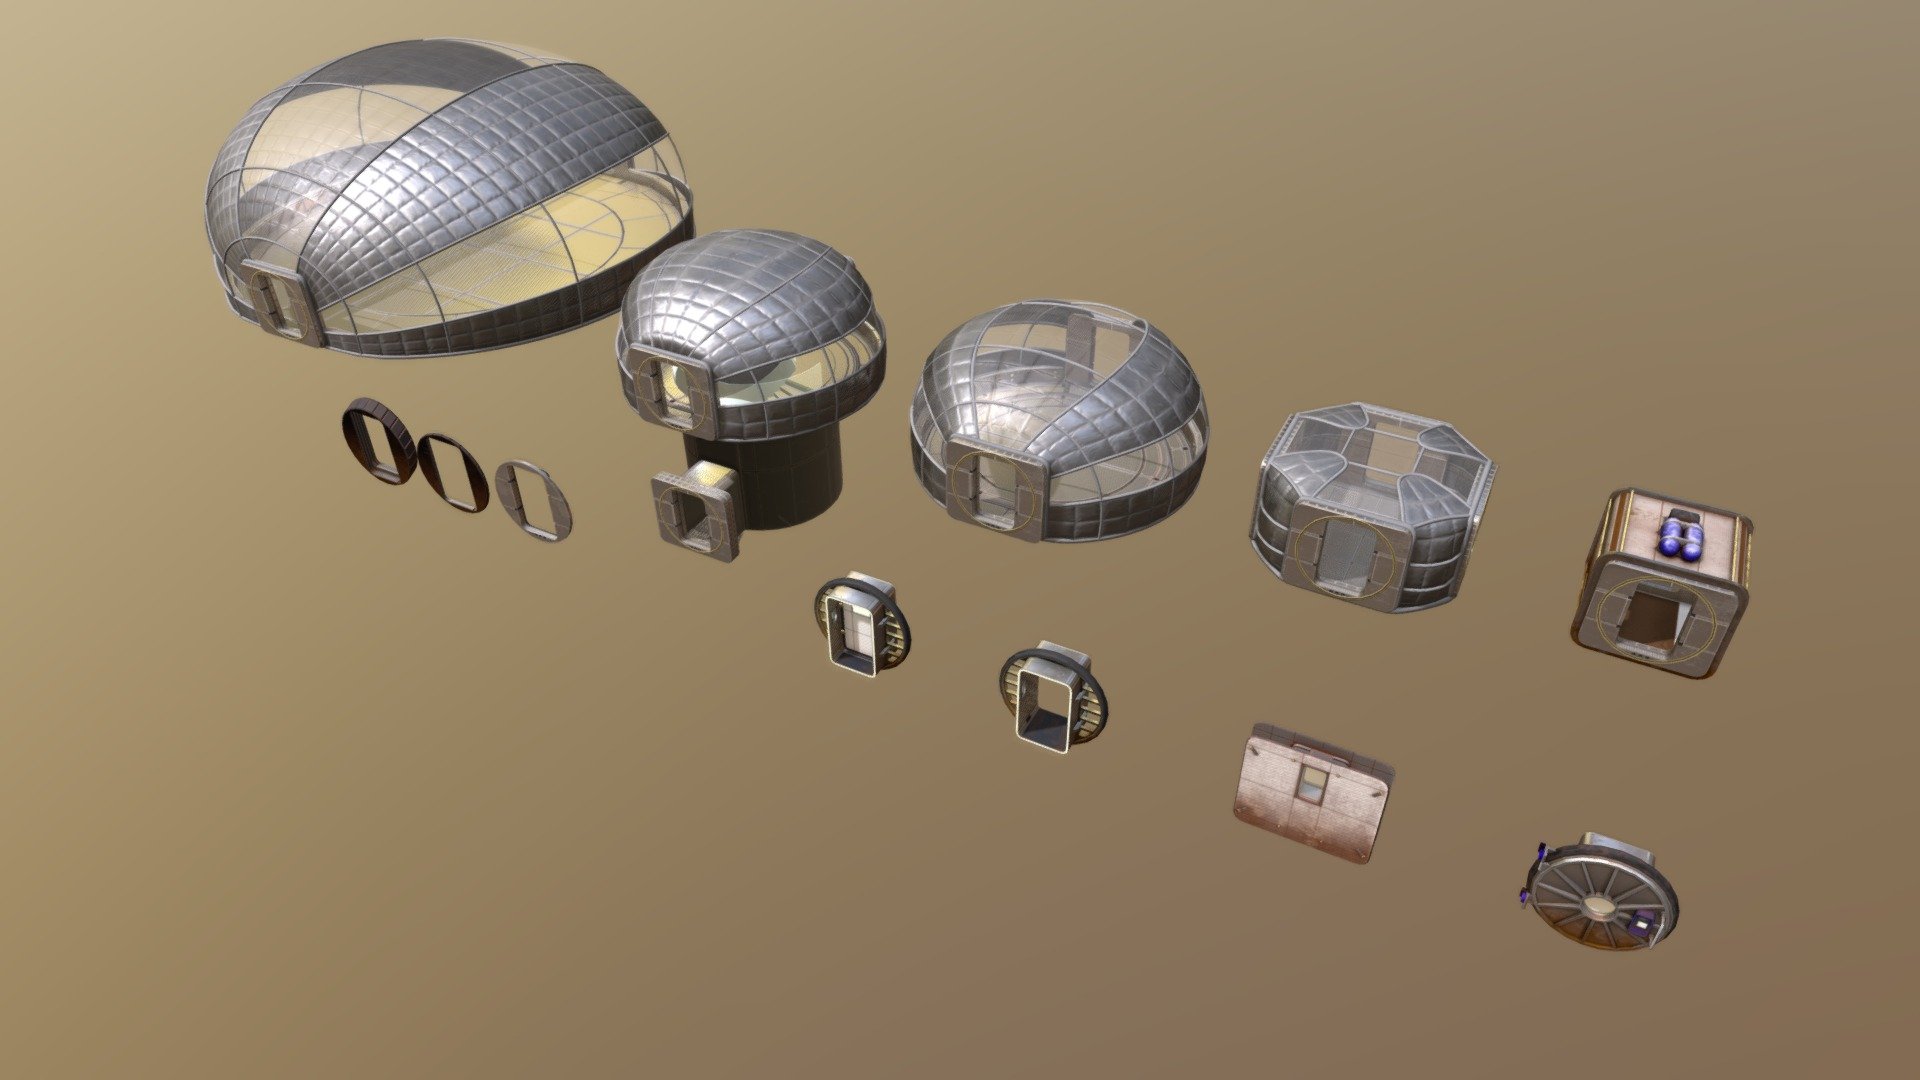 “Tharsis Facility - Mars Habitat 01” is a collection of modules designed to build a scientific base on a planet surface.

Please check an example built using these assets: 
https://skfb.ly/o8tXu

You may also find a detailed view for each module:




Main module: https://skfb.ly/oCLwv

Double module: https://skfb.ly/6RFCZ

Staircase module: https://skfb.ly/oCLwE

Intersection module: https://skfb.ly/oCLws

Corridor connection: https://skfb.ly/oCLwA

Door connection: https://skfb.ly/oCLwx

Cover module: https://skfb.ly/oCLwz

Decompression module: https://skfb.ly/oCLwB

Airlock: https://skfb.ly/6RAvC

Tunnel modules: https://skfb.ly/oCLwF
 - Tharsis Facility - Modular space habitat - Buy Royalty Free 3D model by Jake Ouviña (@jakeouvina) 3d model